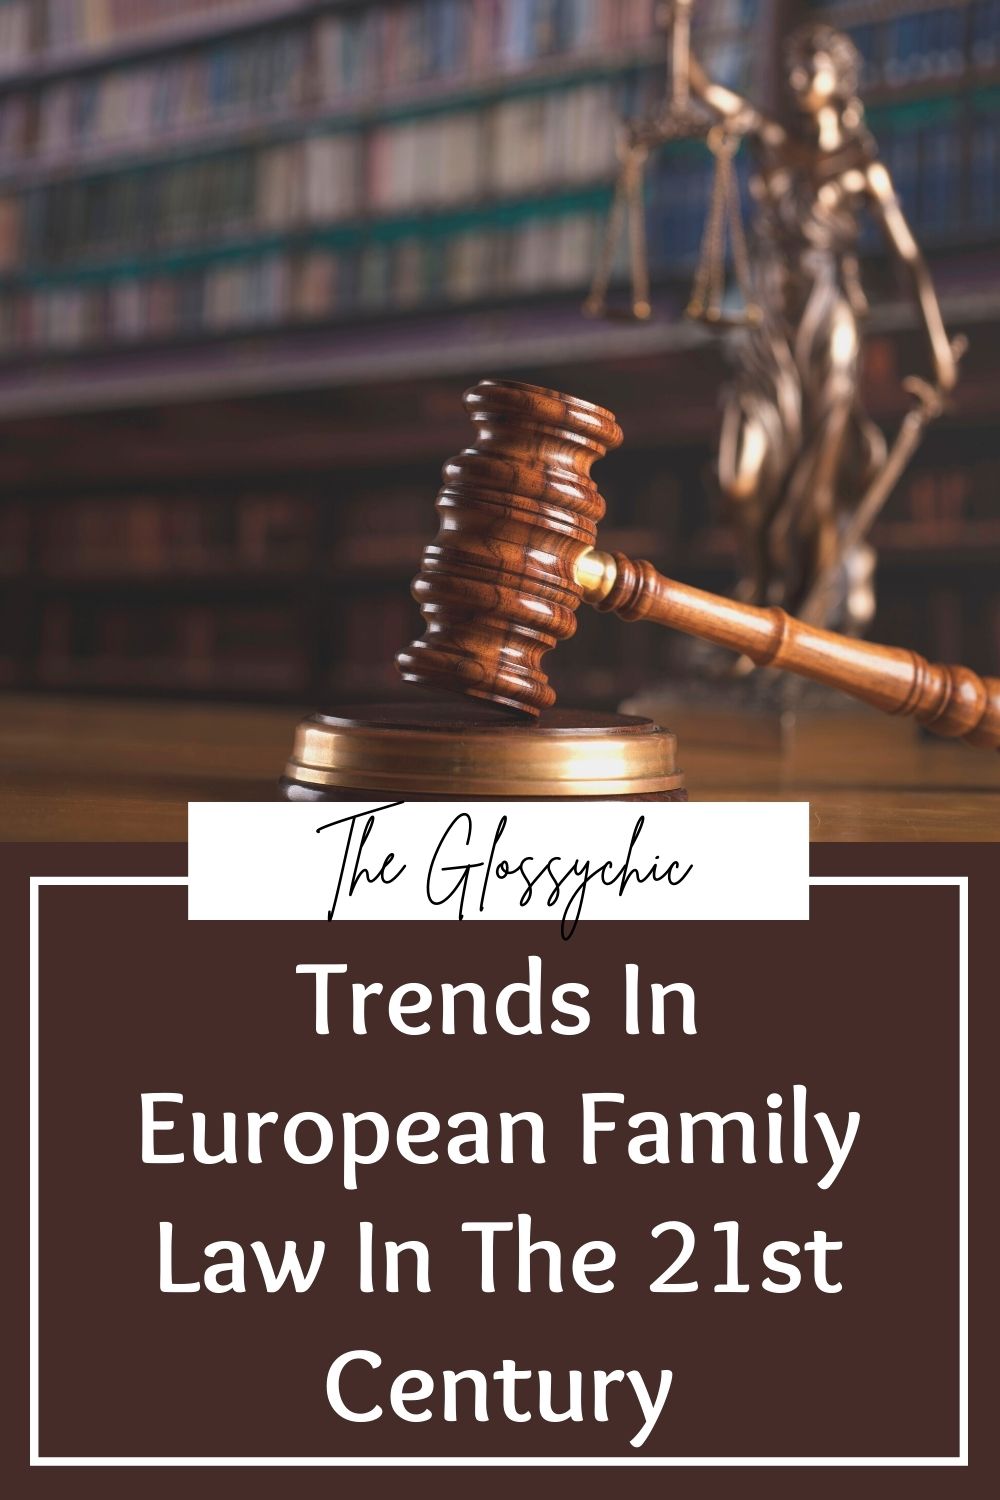 Trends In European Family Law In The 21st Century